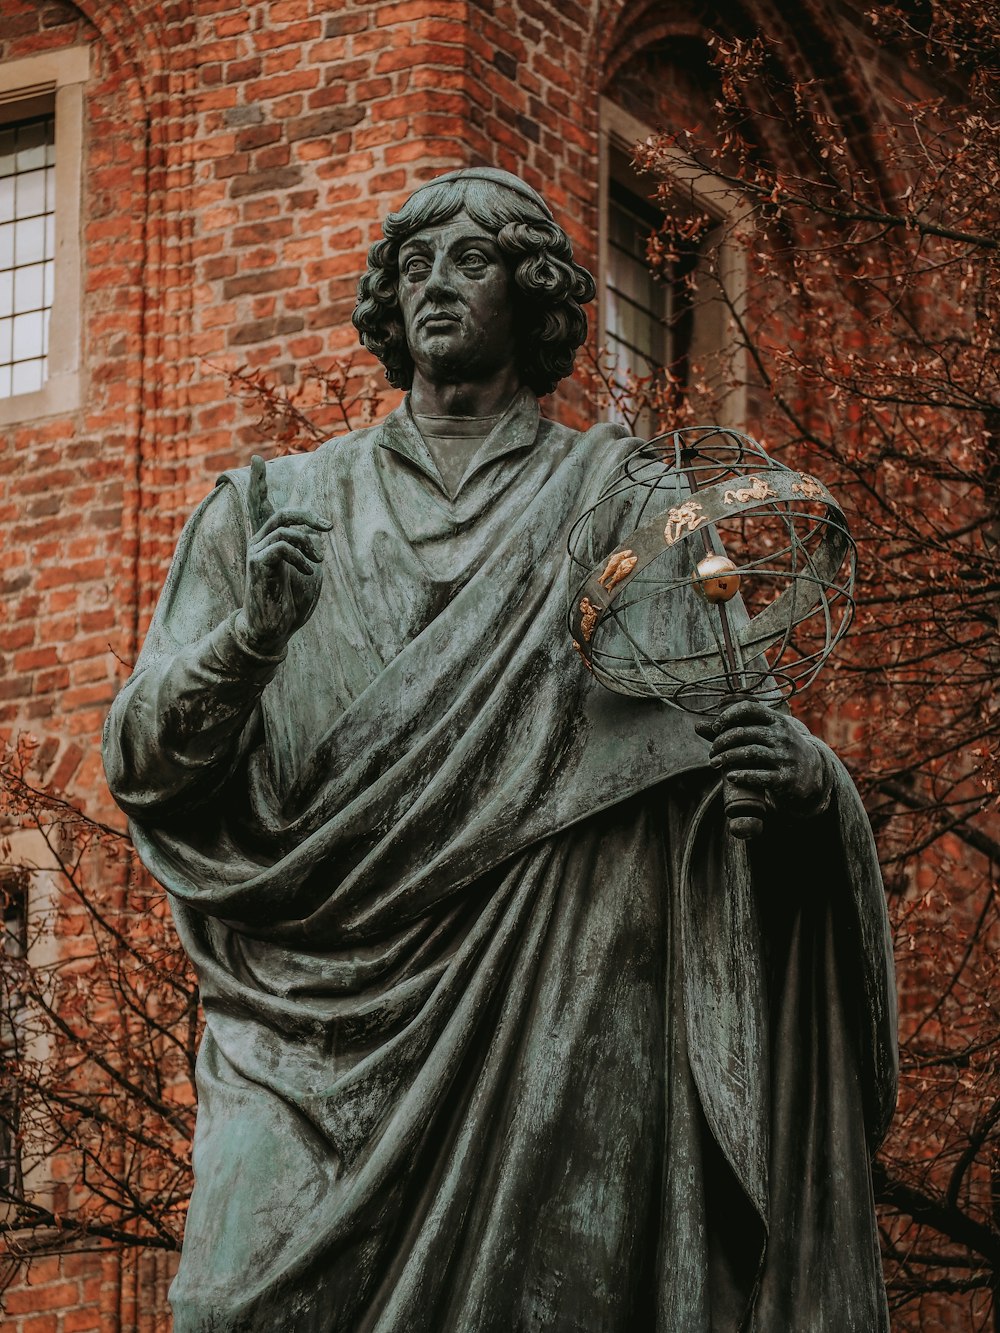 a statue of a man holding a fan in front of a brick building